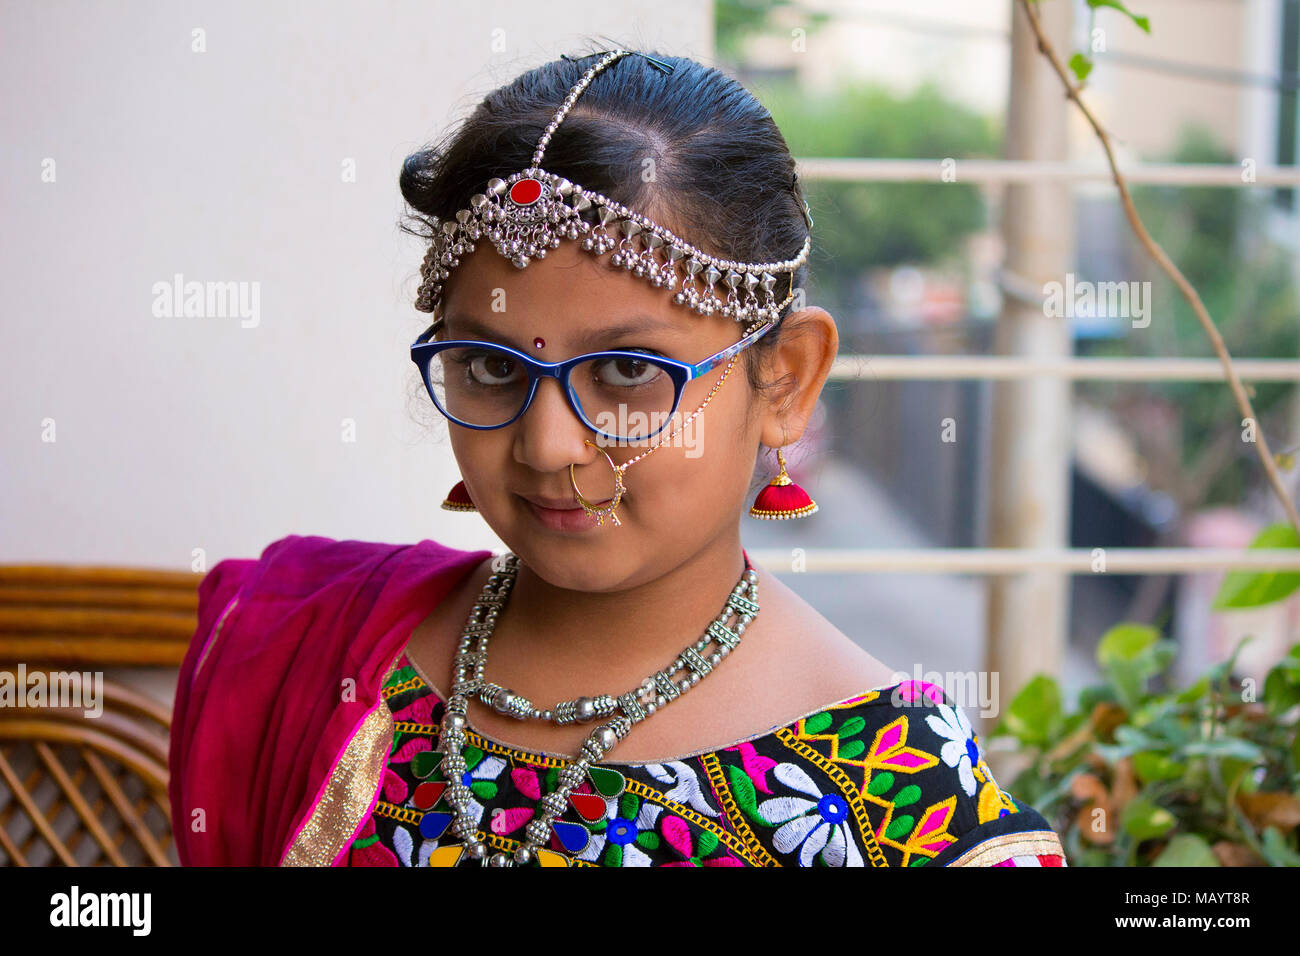 Little cute Girl wear traditional Rajasthani outfit and jewelry Stock Photo